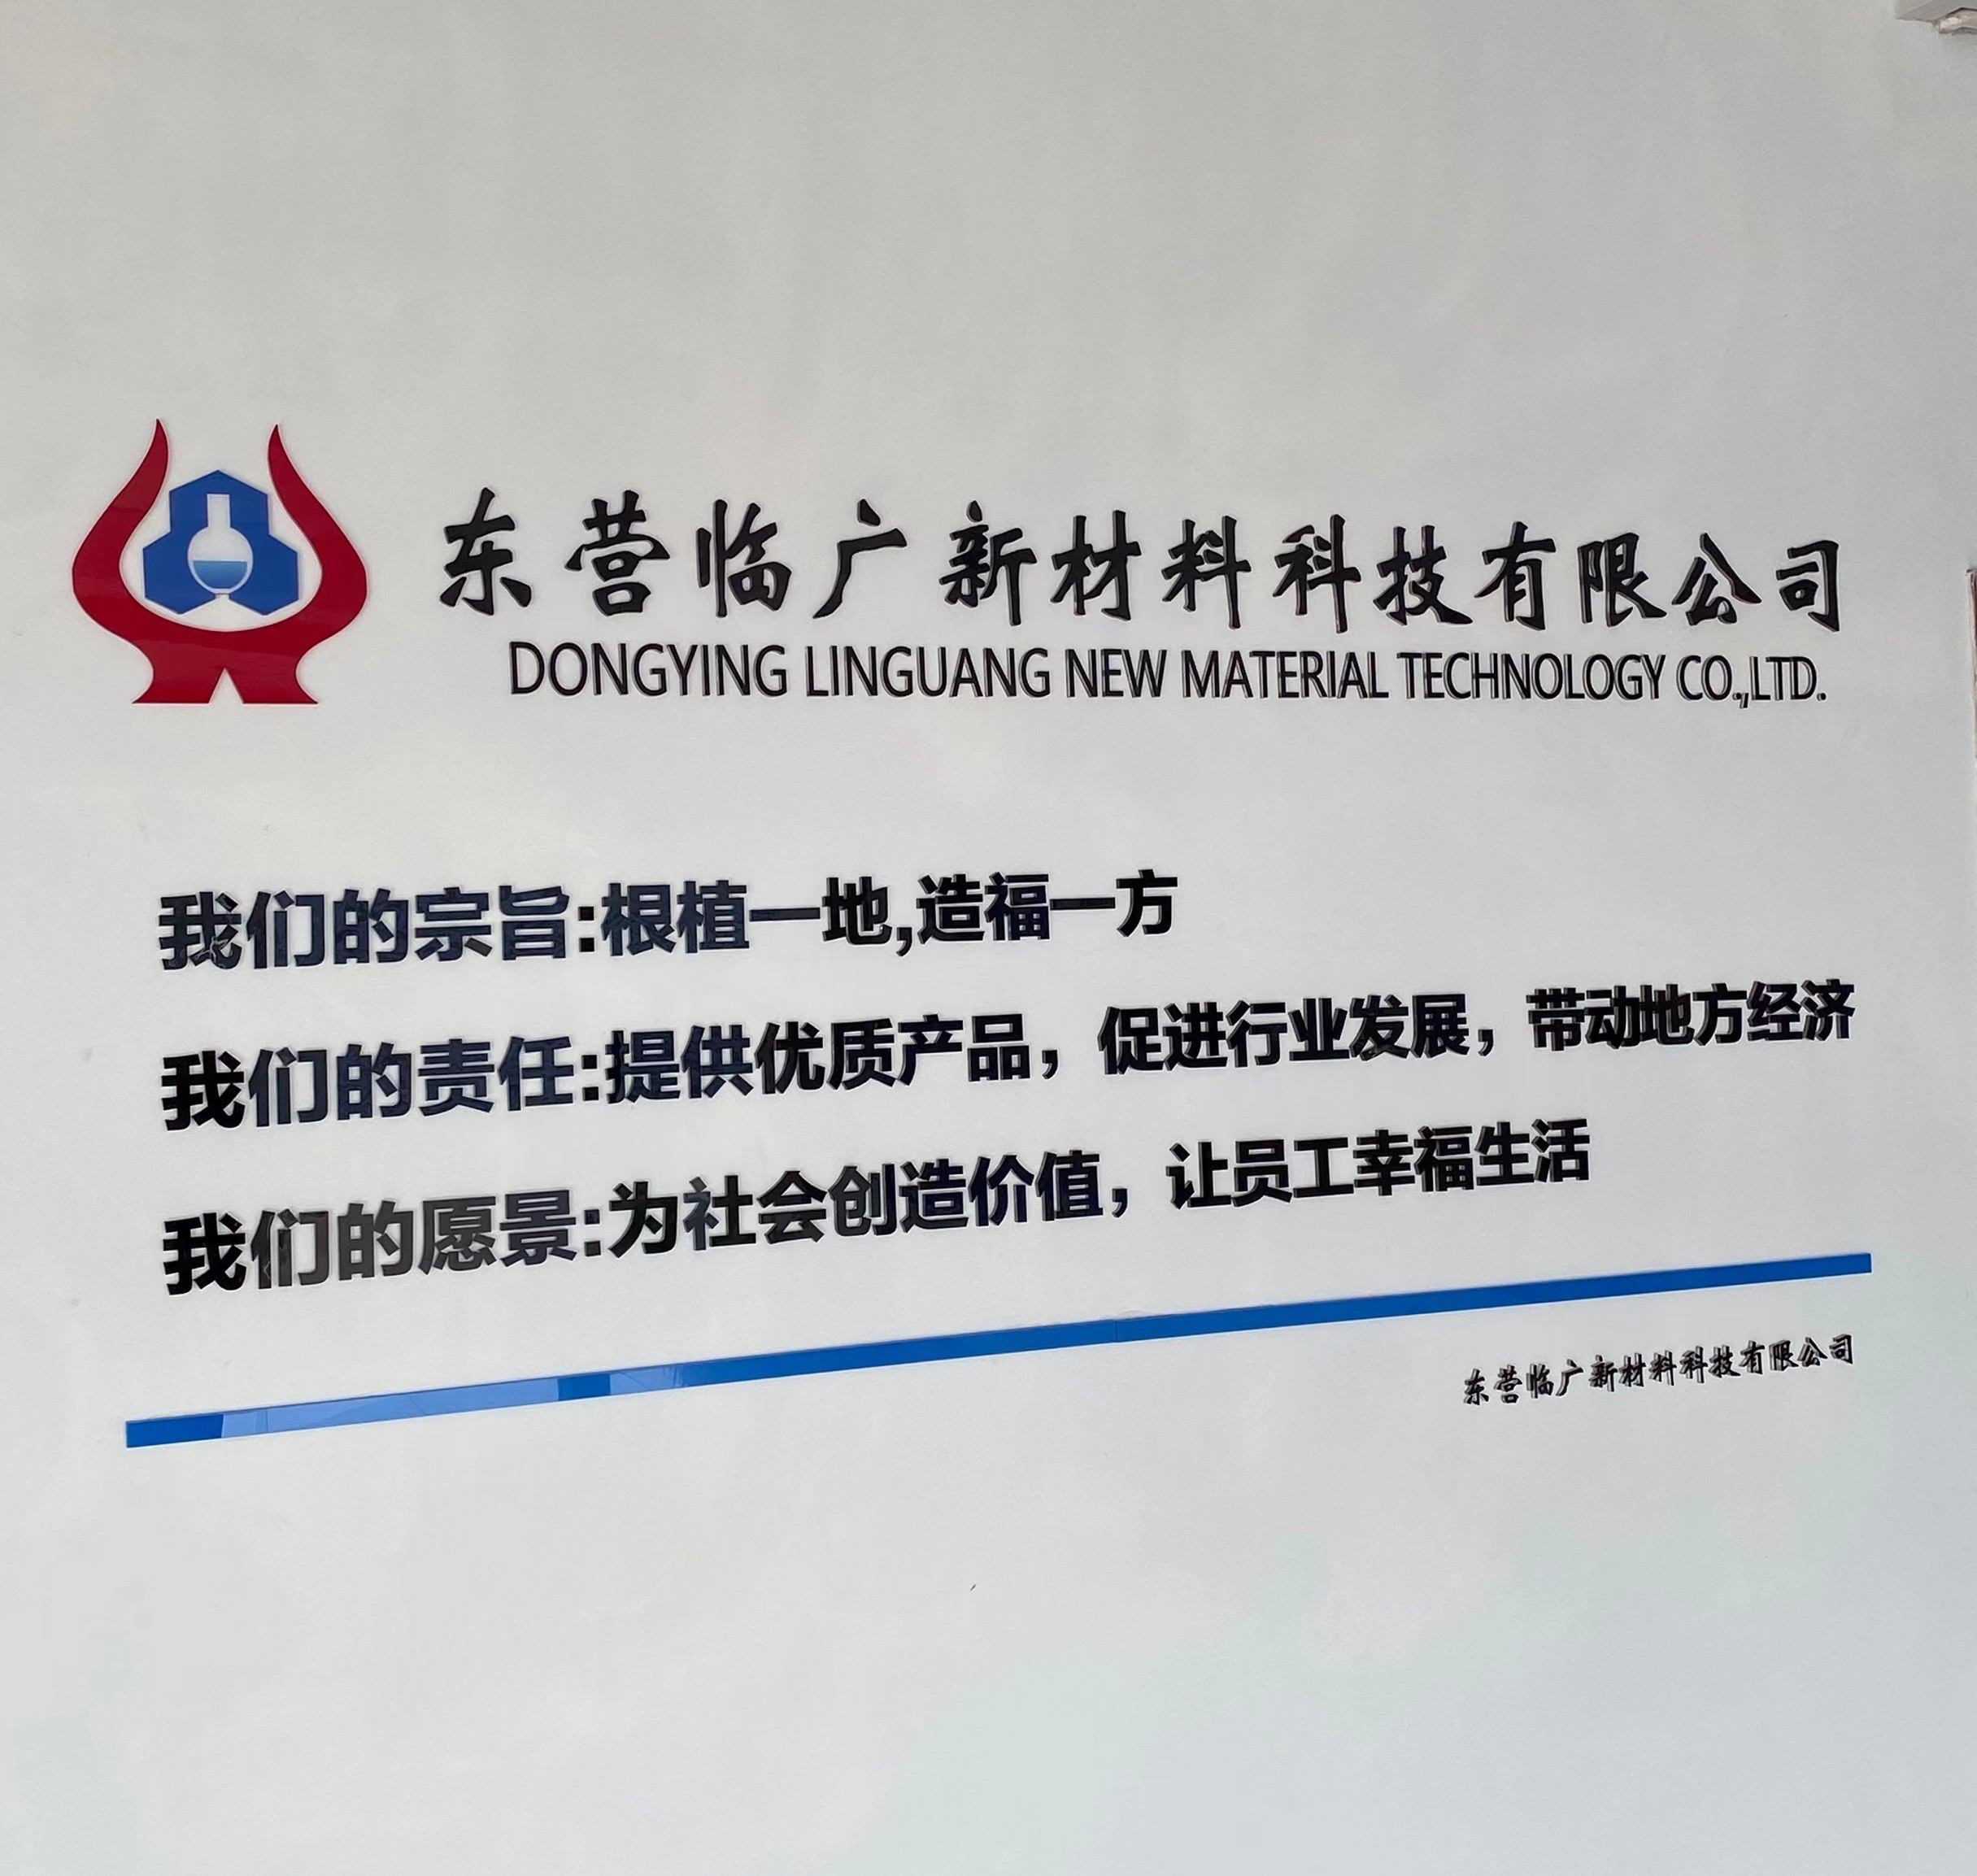 Dongying Linguang New Material Technology Co., Ltd.